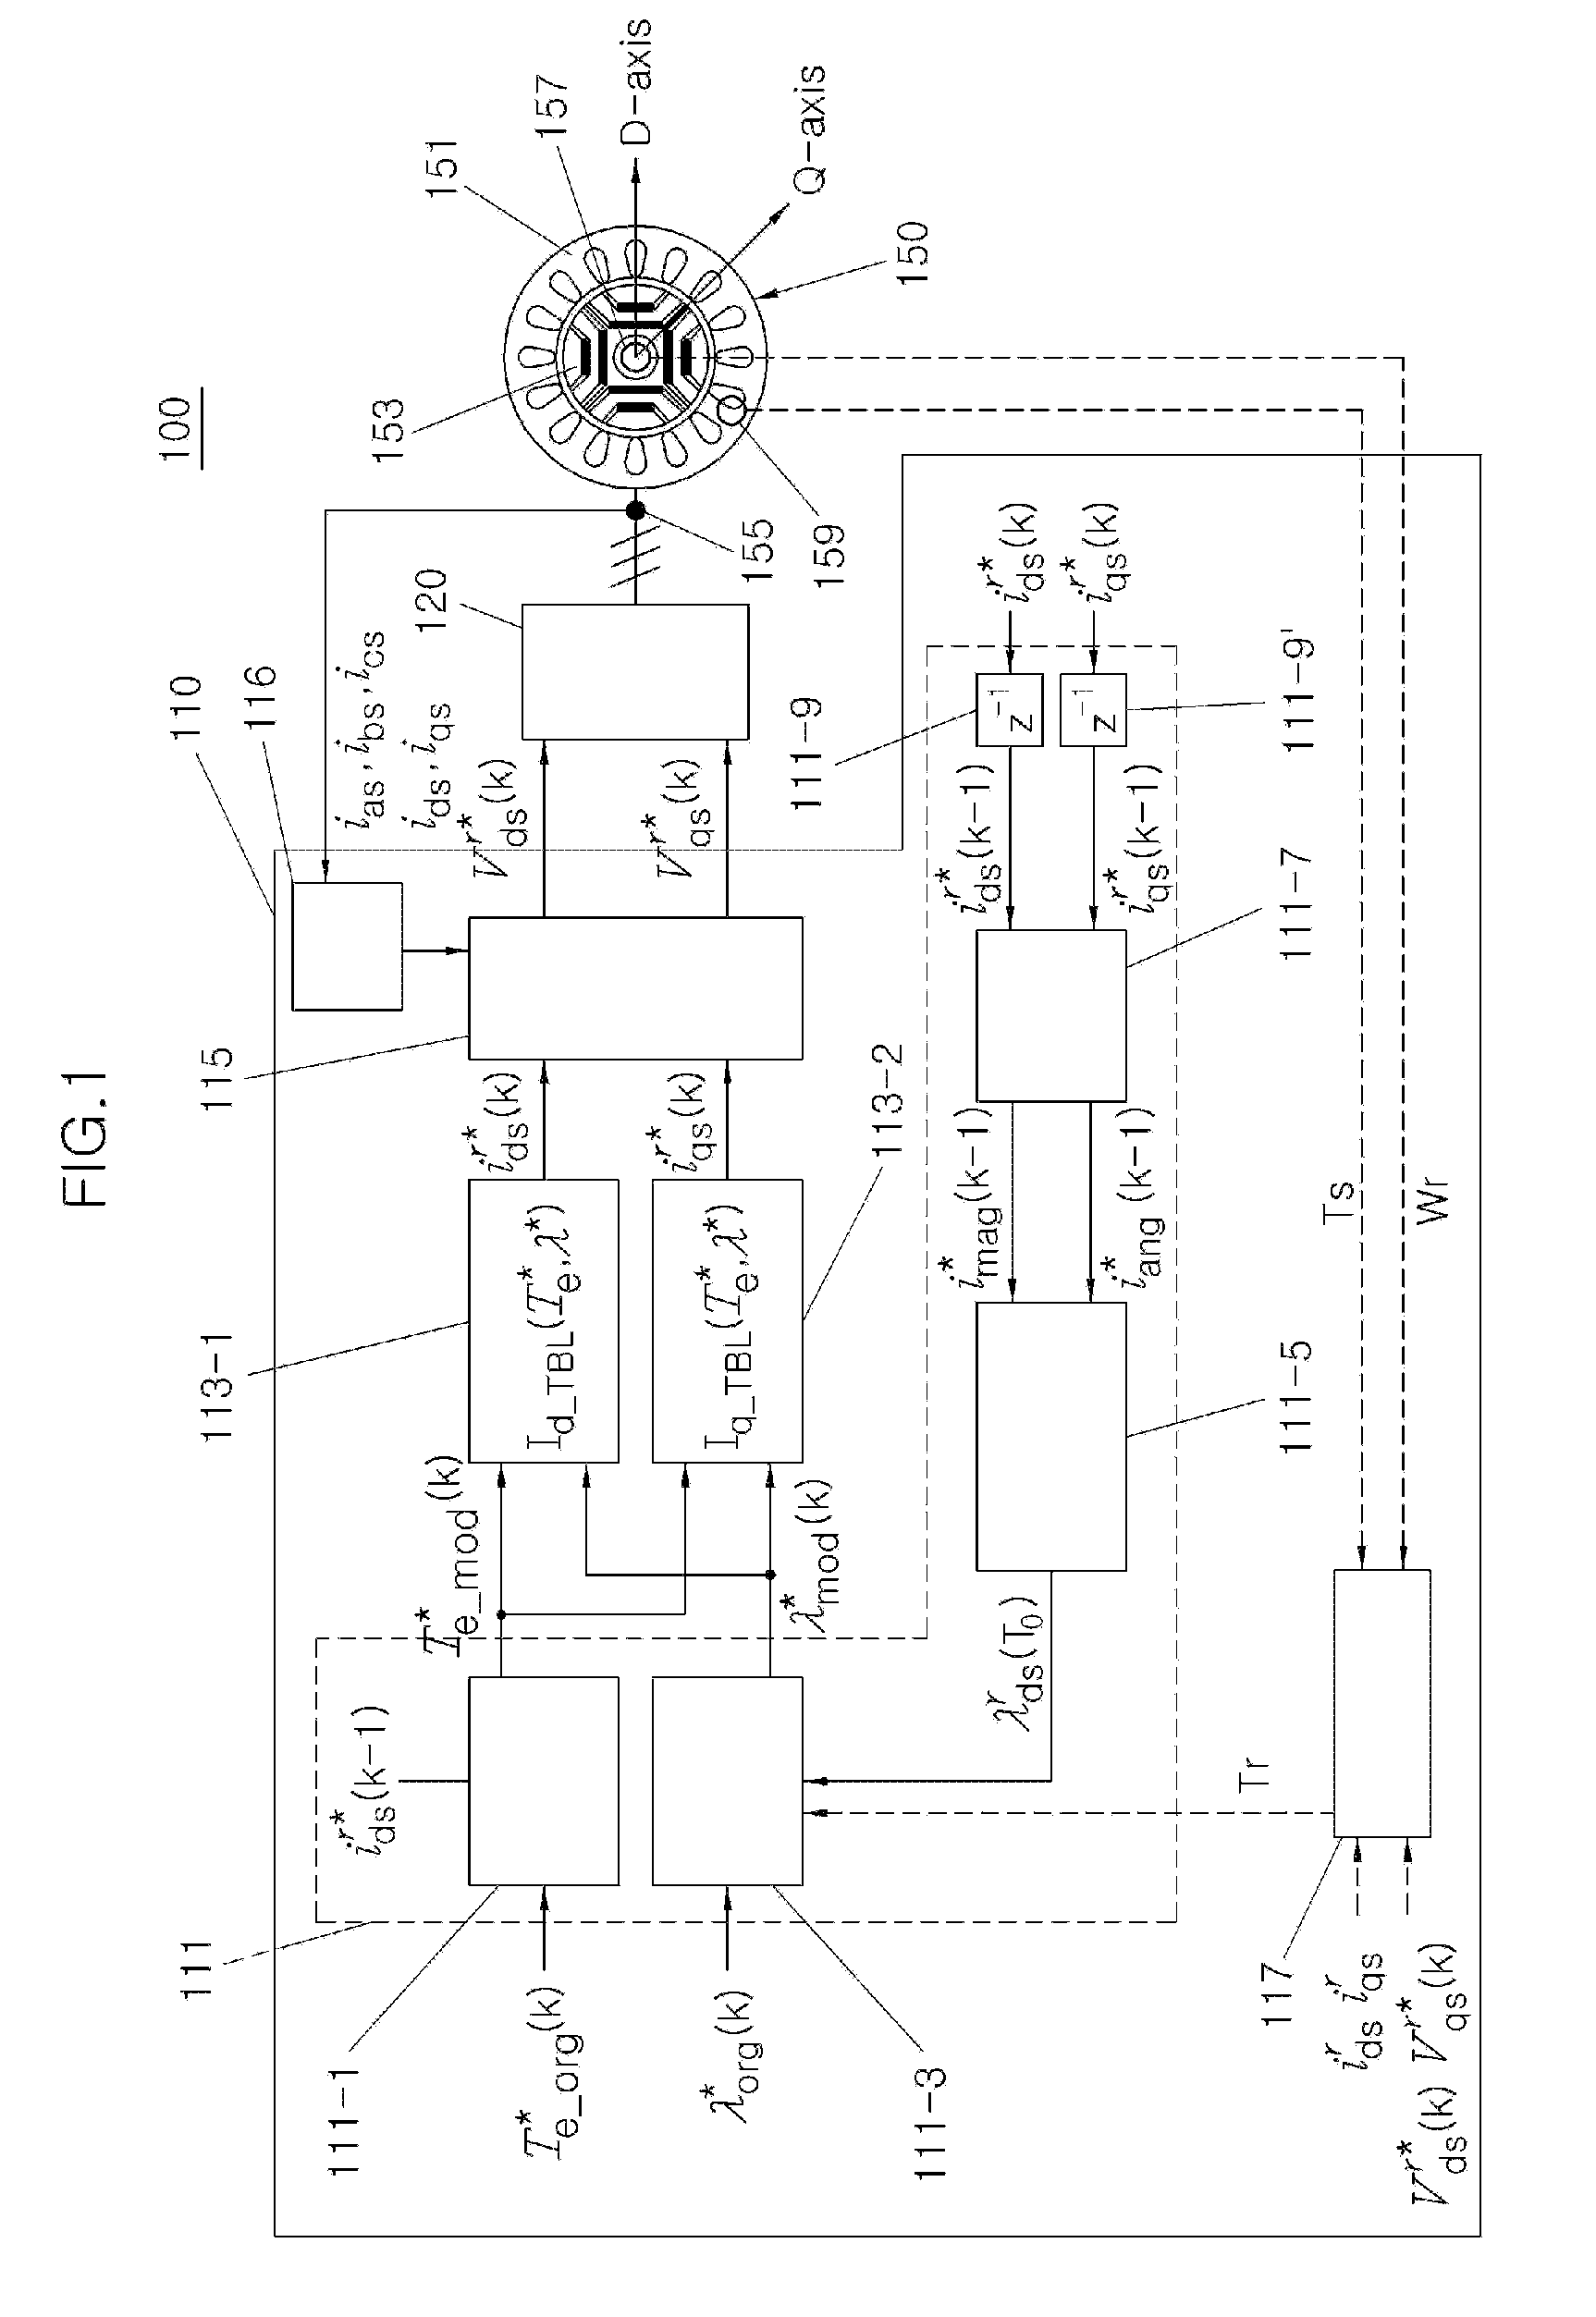 Apparatus and method for minimizing influence of temperature change in motor